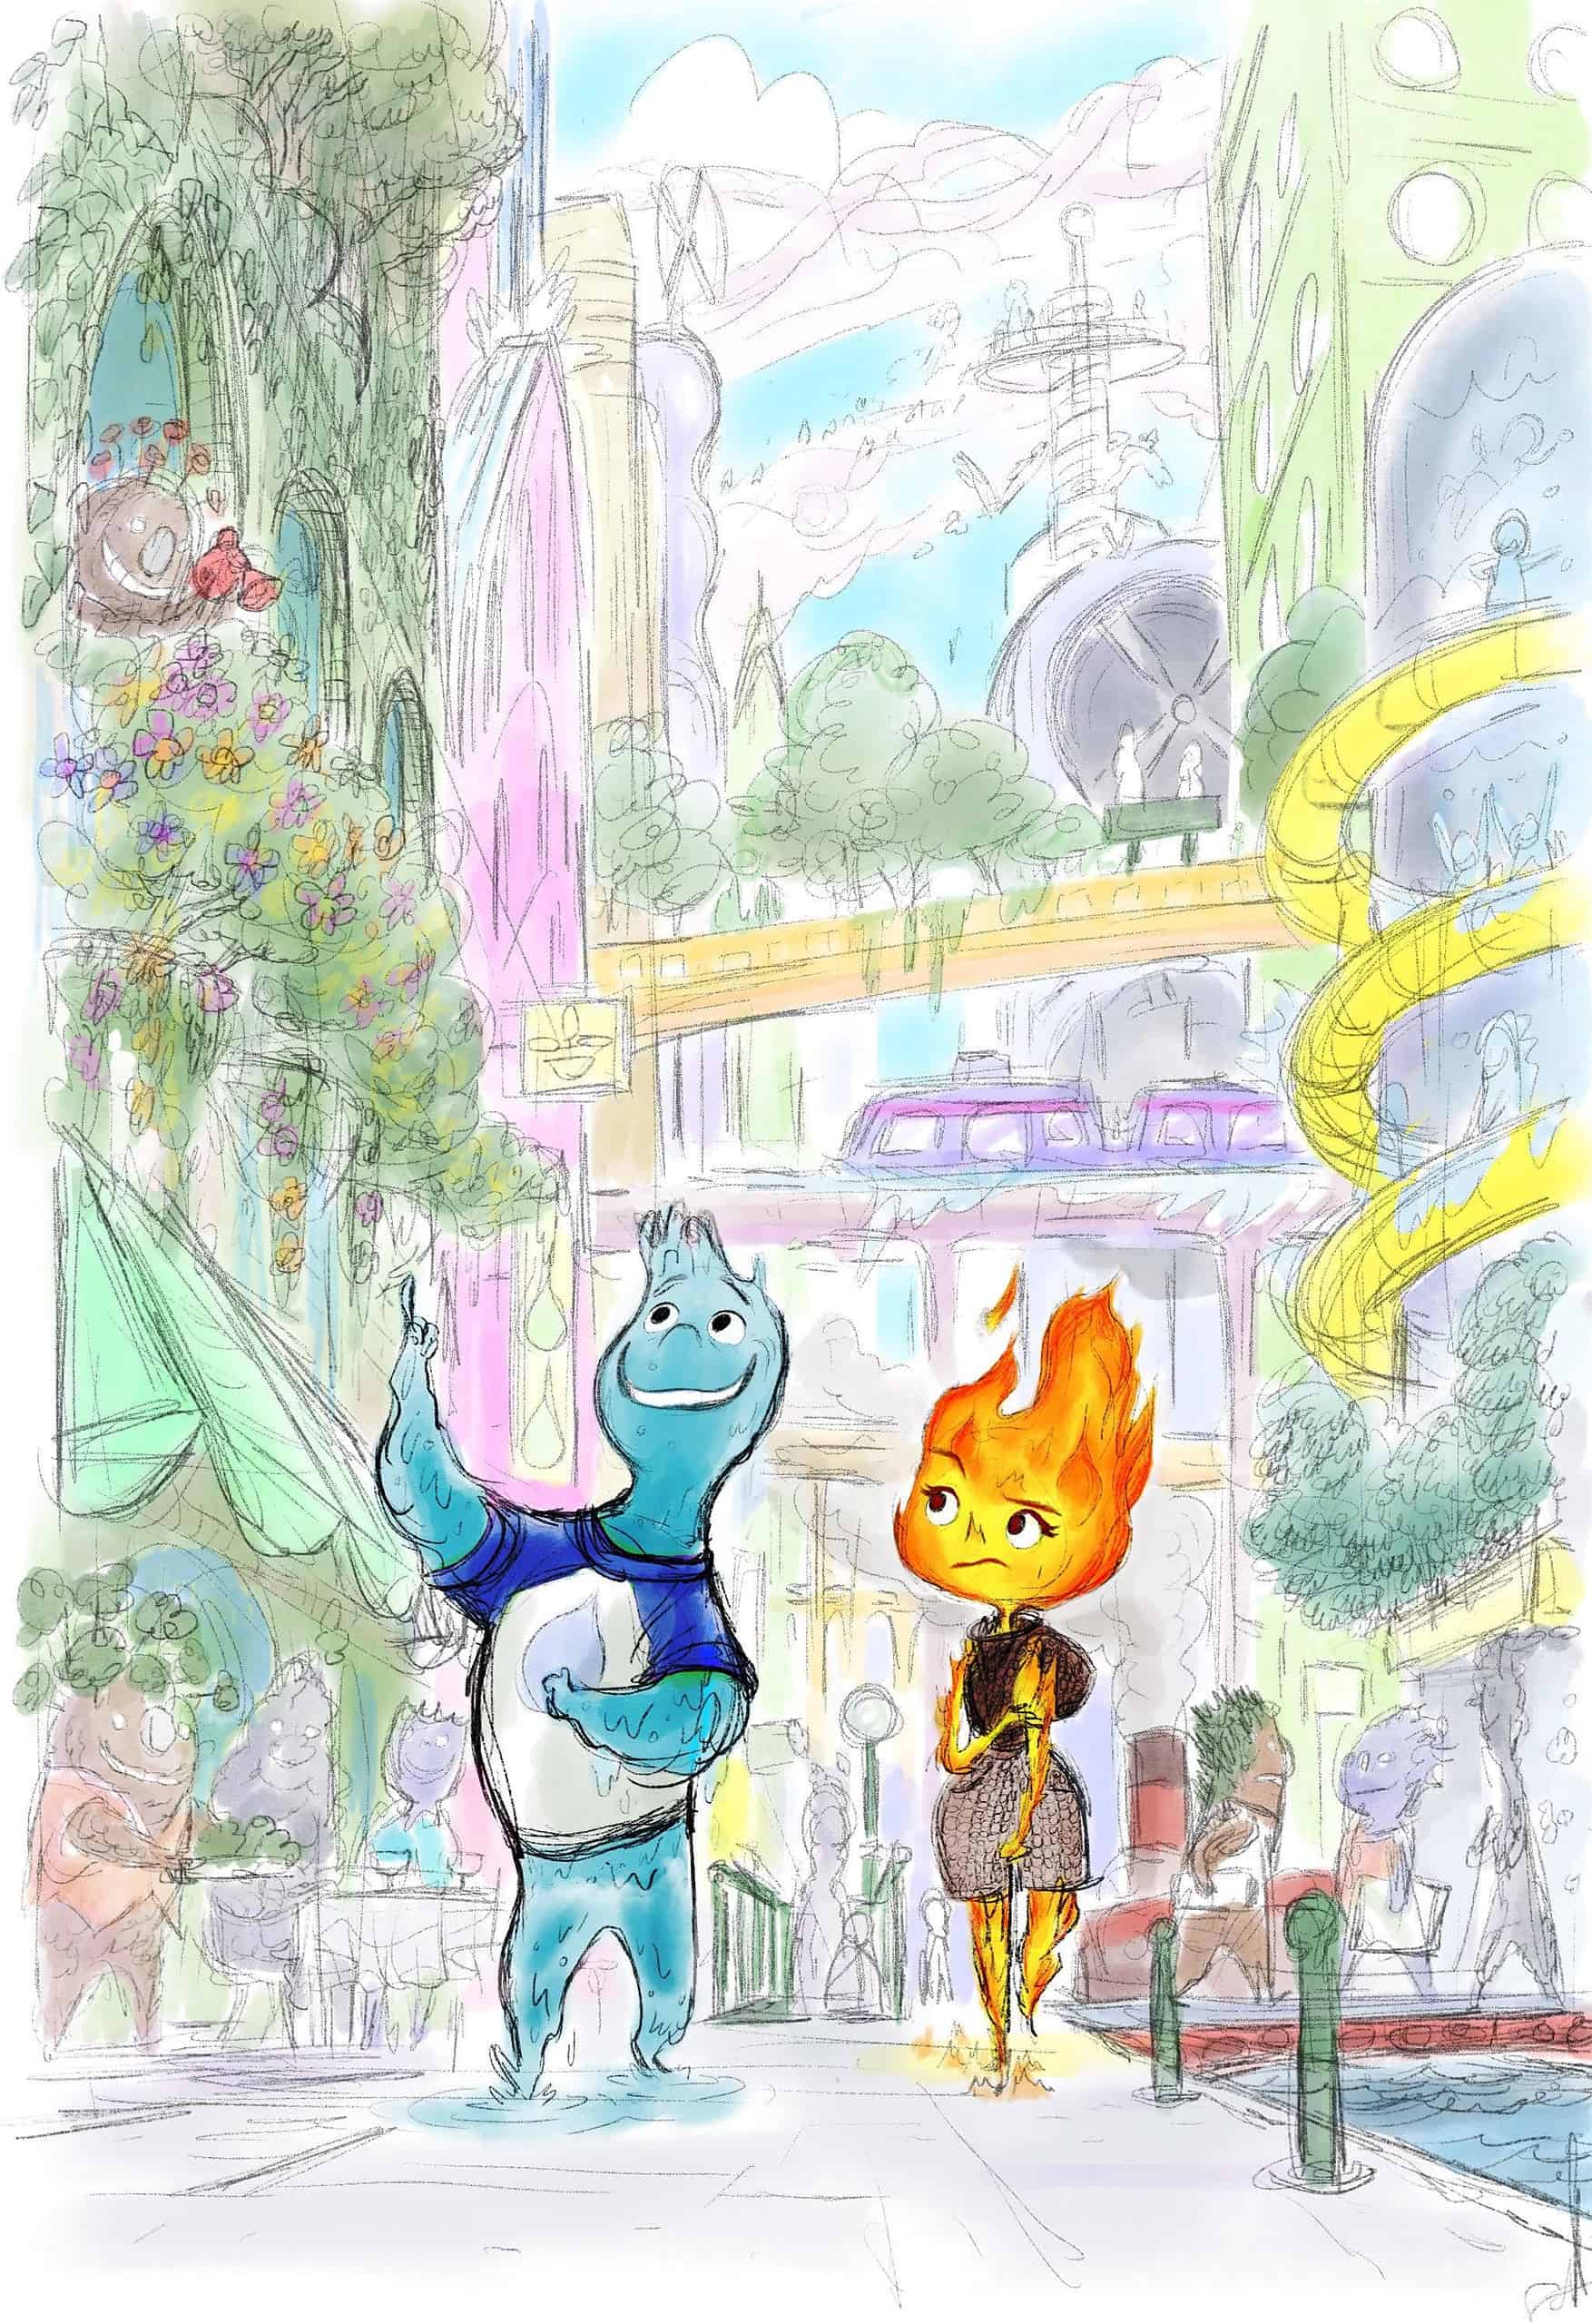 Elemental concept art with Wade and Ember walking on the town's sidewalk